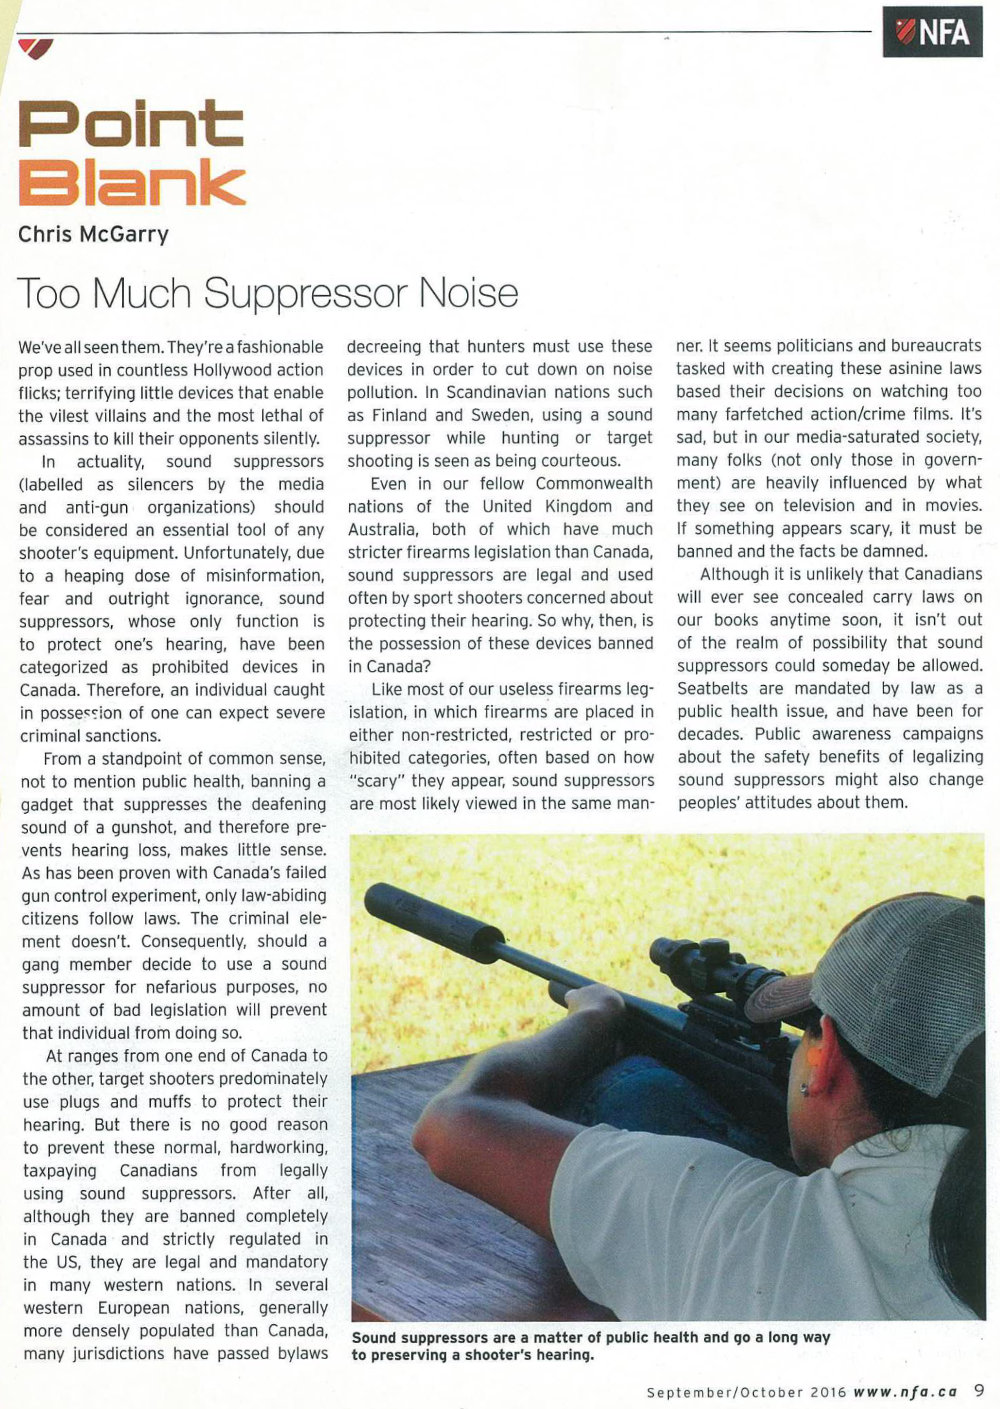 Too Much Suppressor Noise